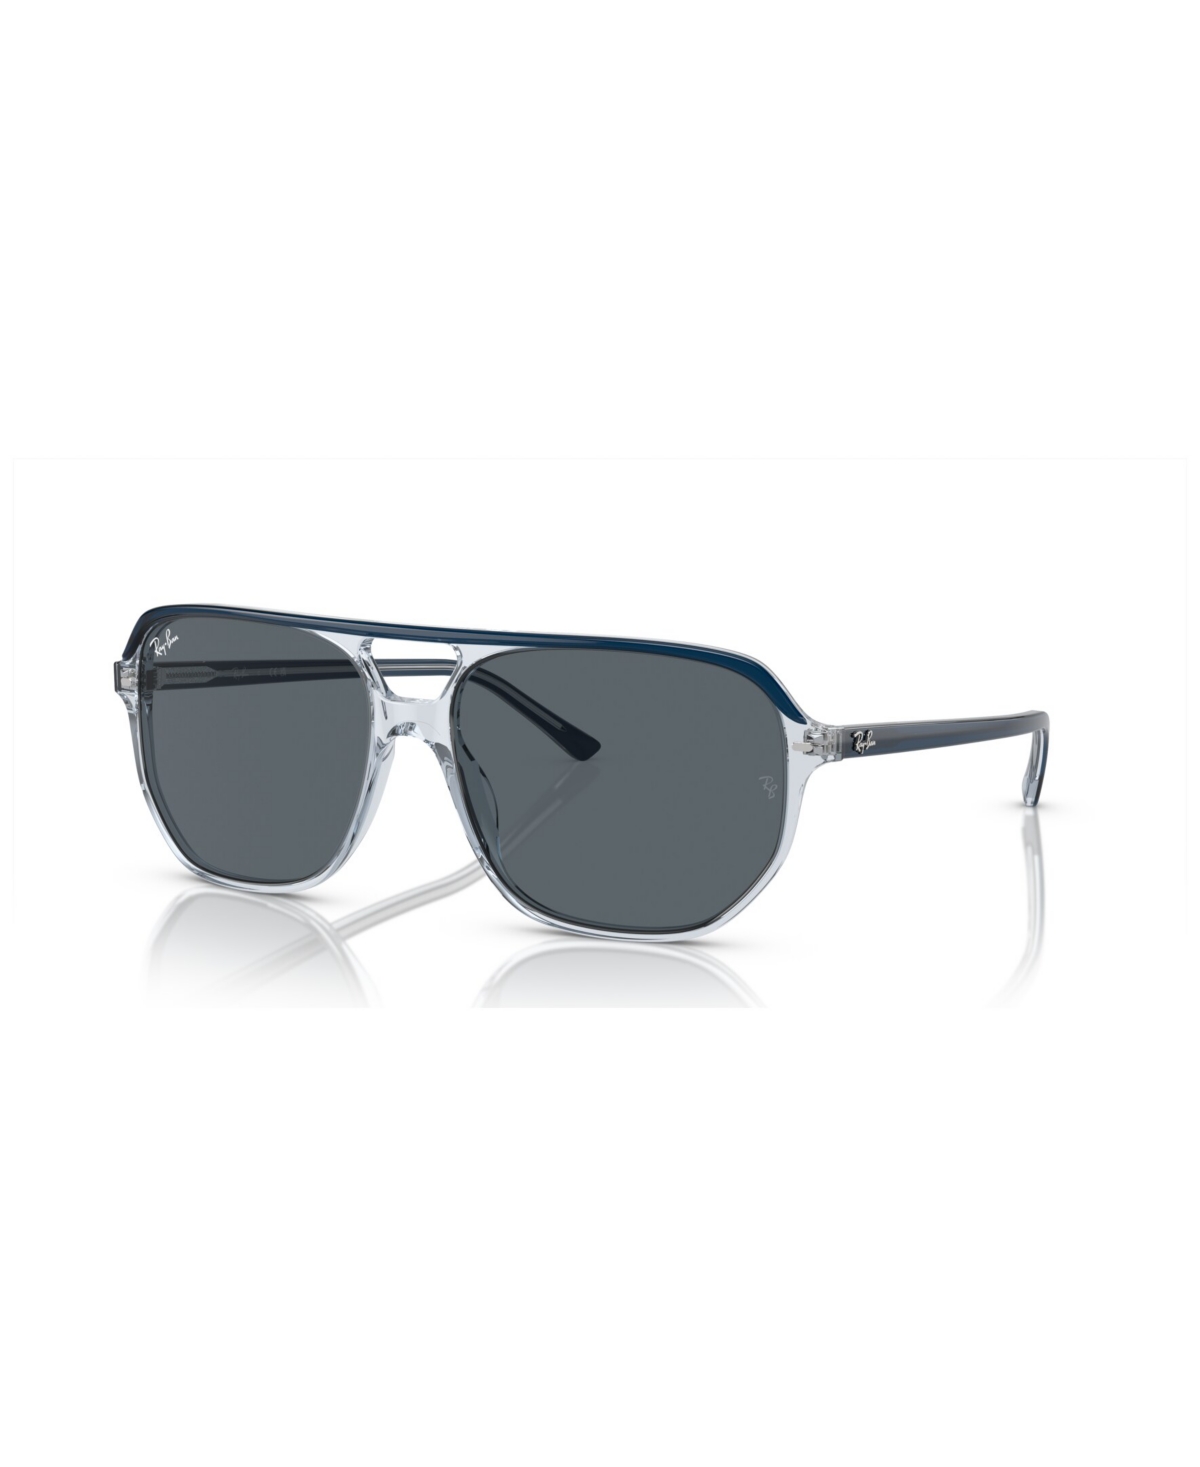 Ray Ban Unisex Bill One Sunglasses Rb2205 In Blue On Transparent Blue